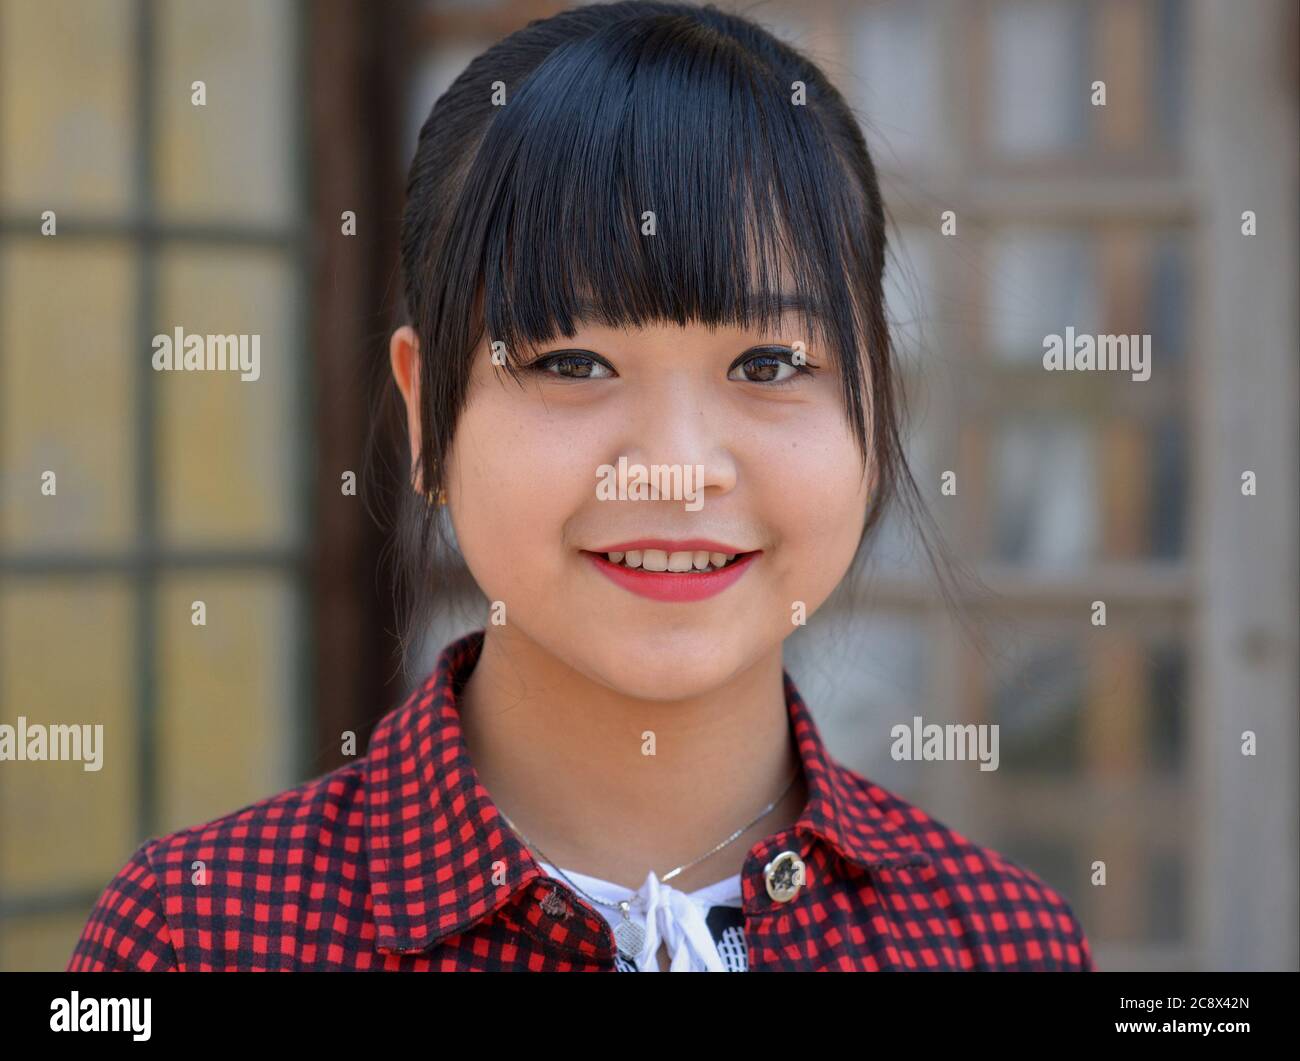 Pretty Burmese teen girl with bangs and cute chubby cheeks smiles for the camera. Stock Photo